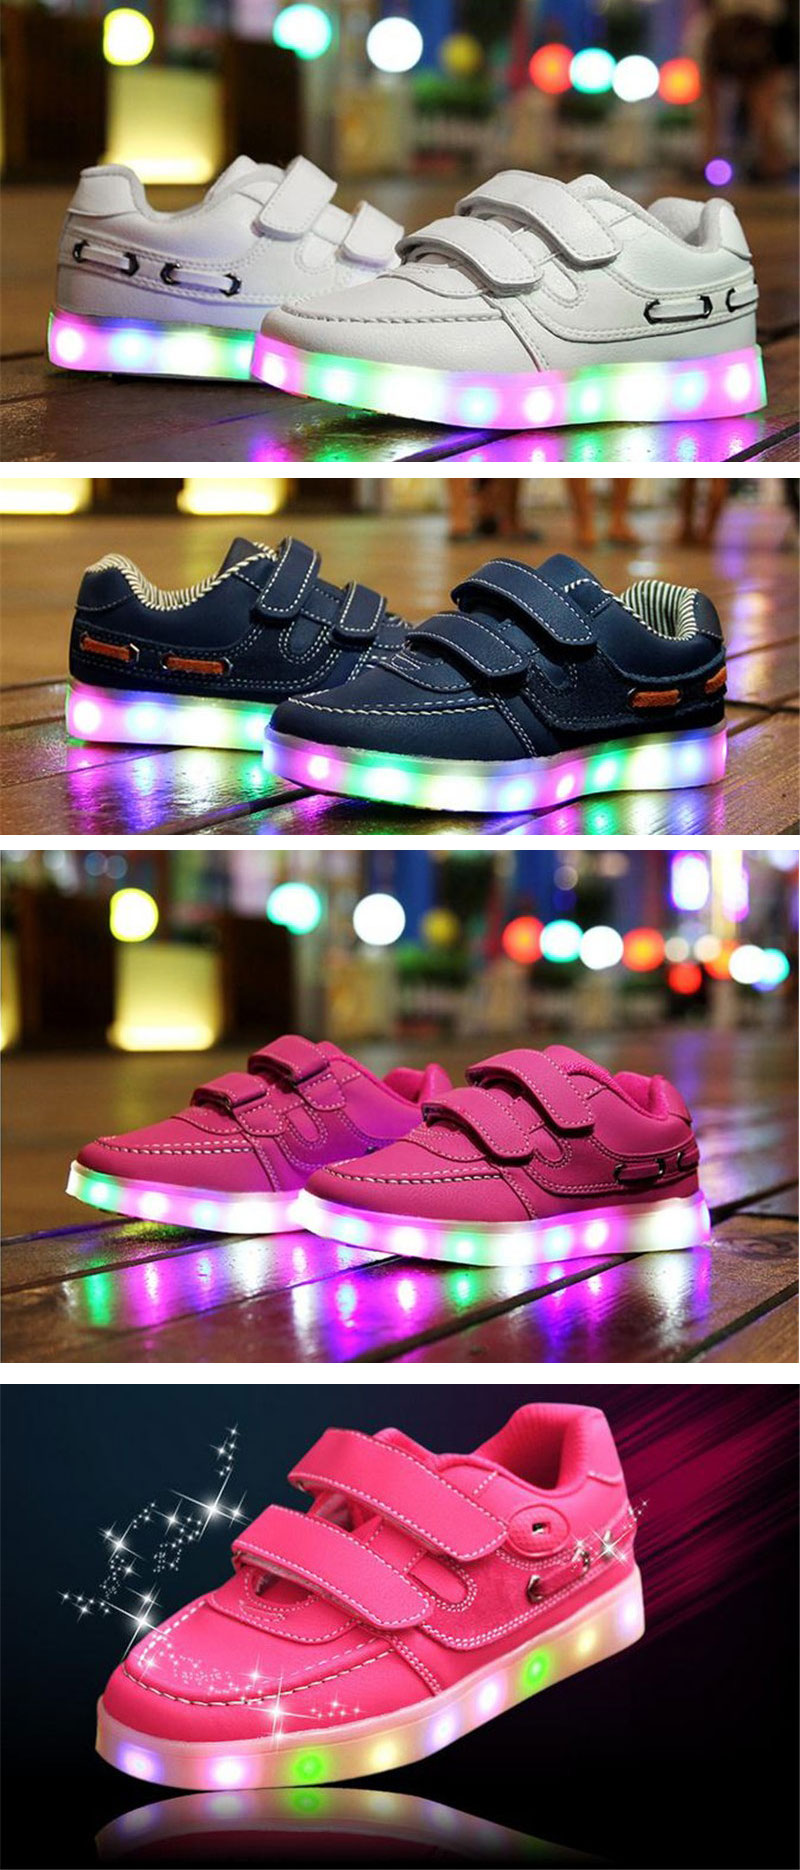 Kids-Colorful-LED-Shoes-Sneakers-Light-Up-Sports-Shoes-Dance-Magic-Tapes-1046594